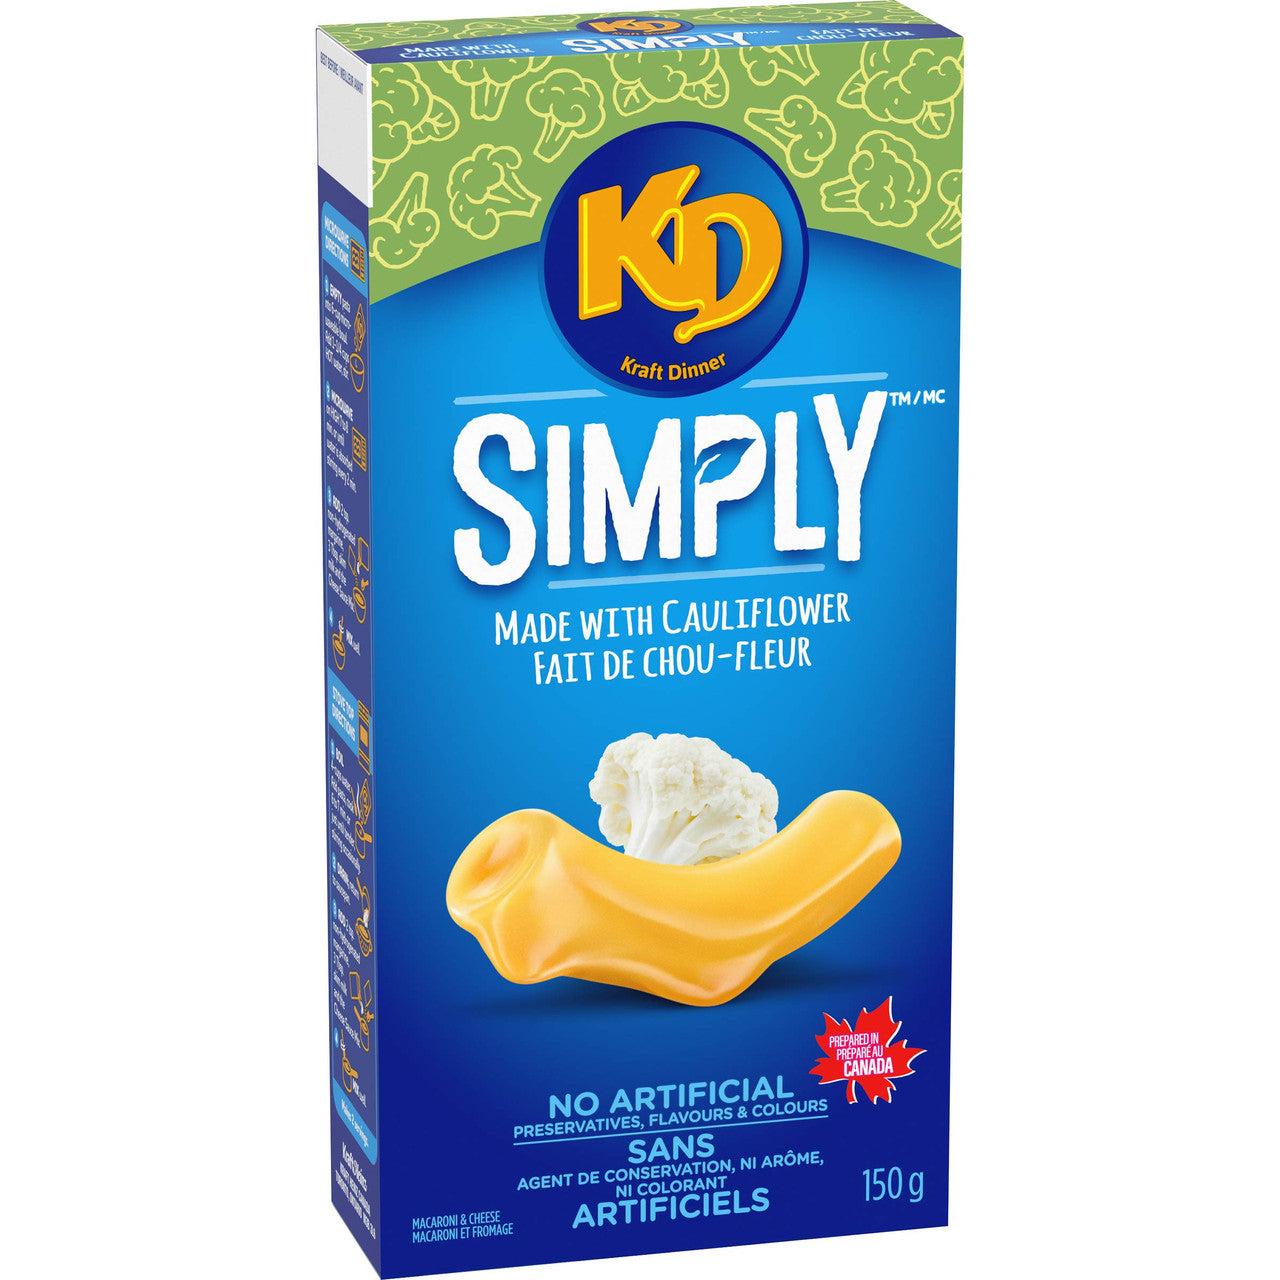 Kraft Dinner Simply Macaroni & Cheese with Cauliflower, 150g/5.3 oz., (12 Pack) {Imported from Canada}